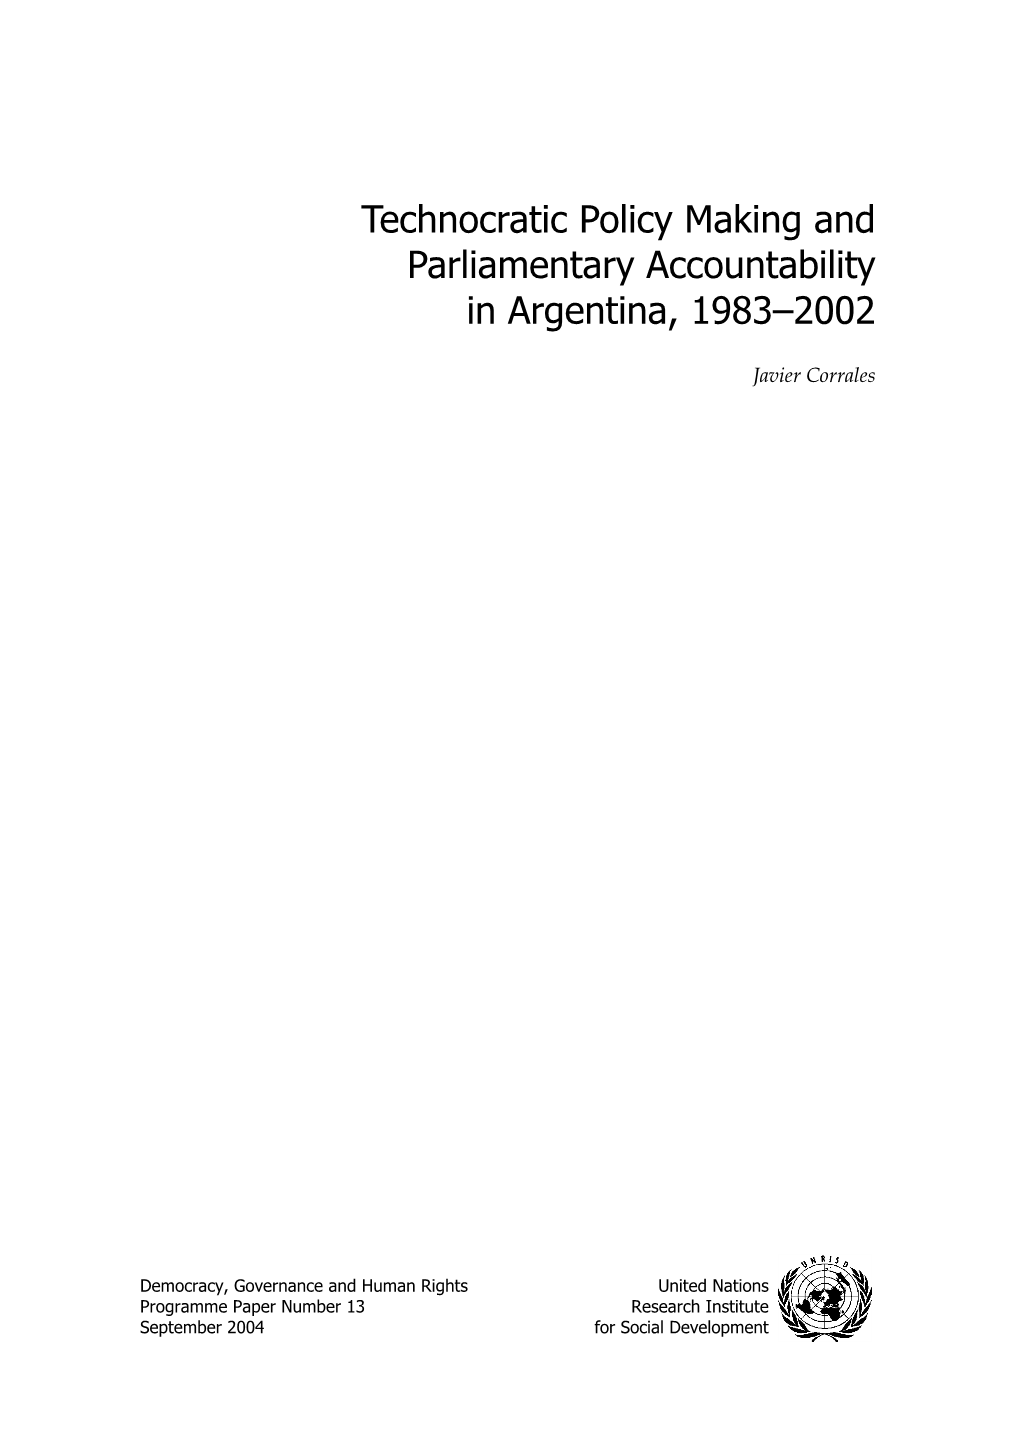 Technocratic Policy Making and Parliamentary Accountability in Argentina, 1983-2002